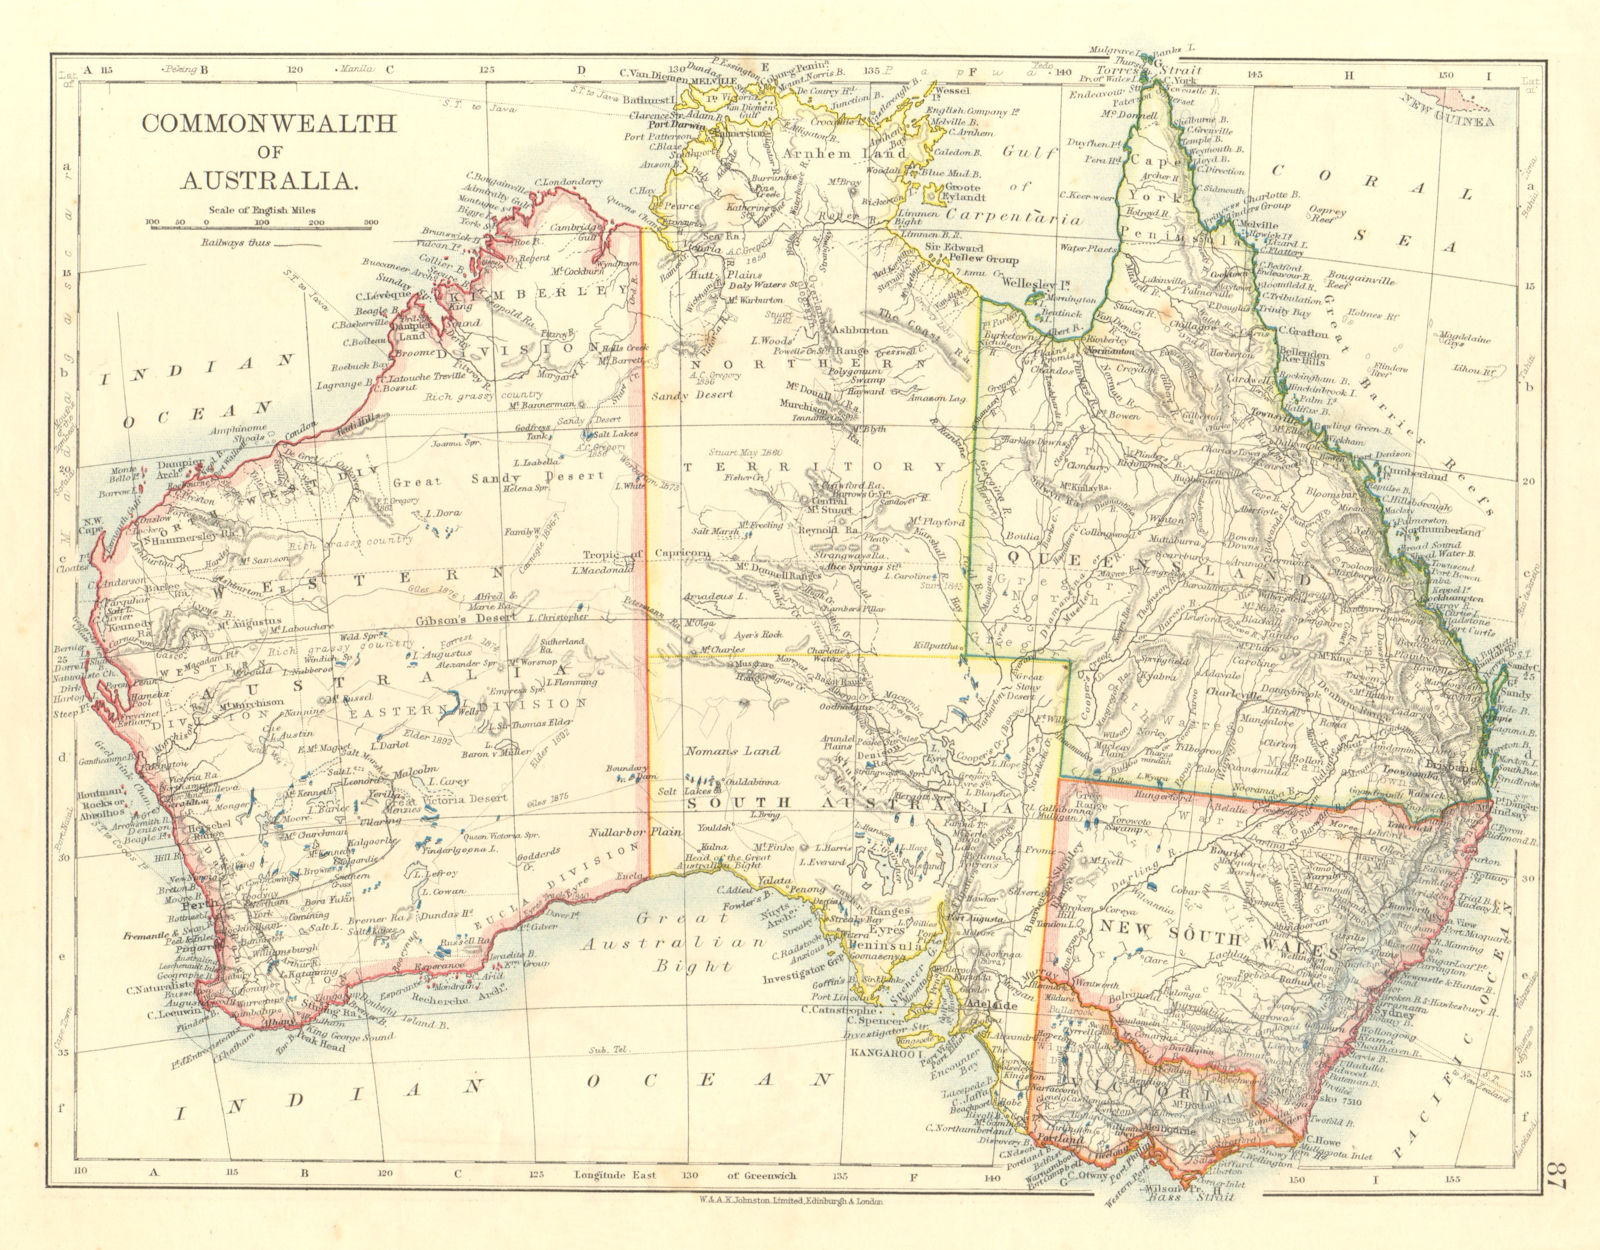 AUSTRALIA. States. Showing Northern Territory within SA.  JOHNSTON 1906 map